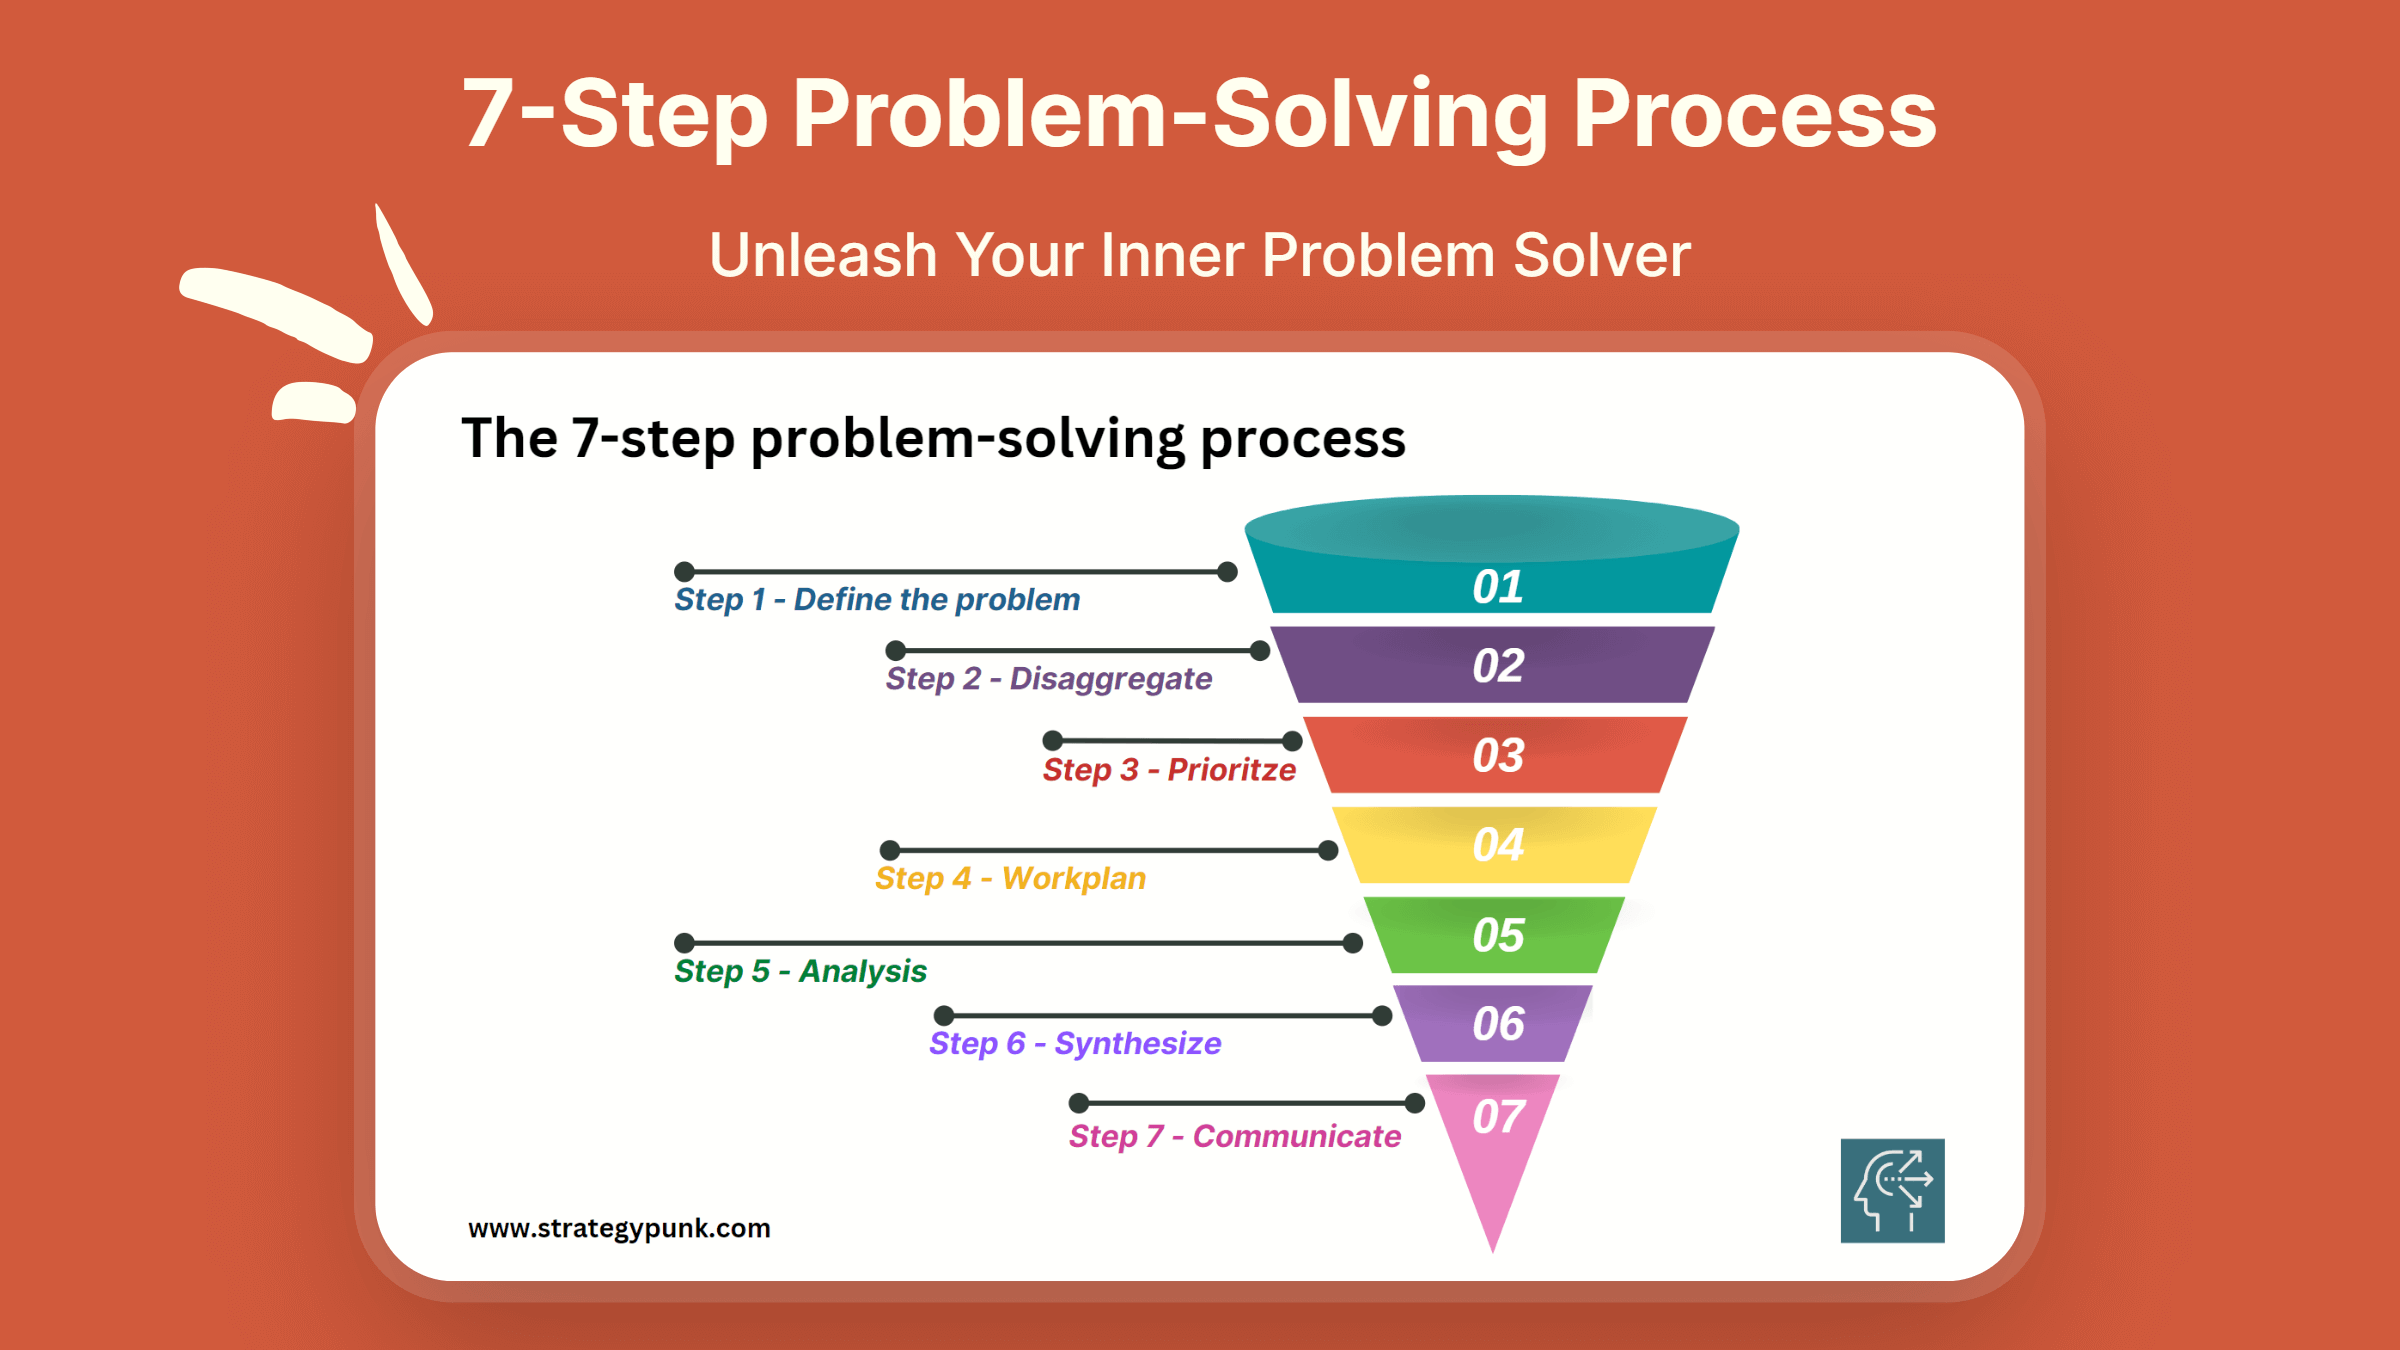 name the steps of problem solving